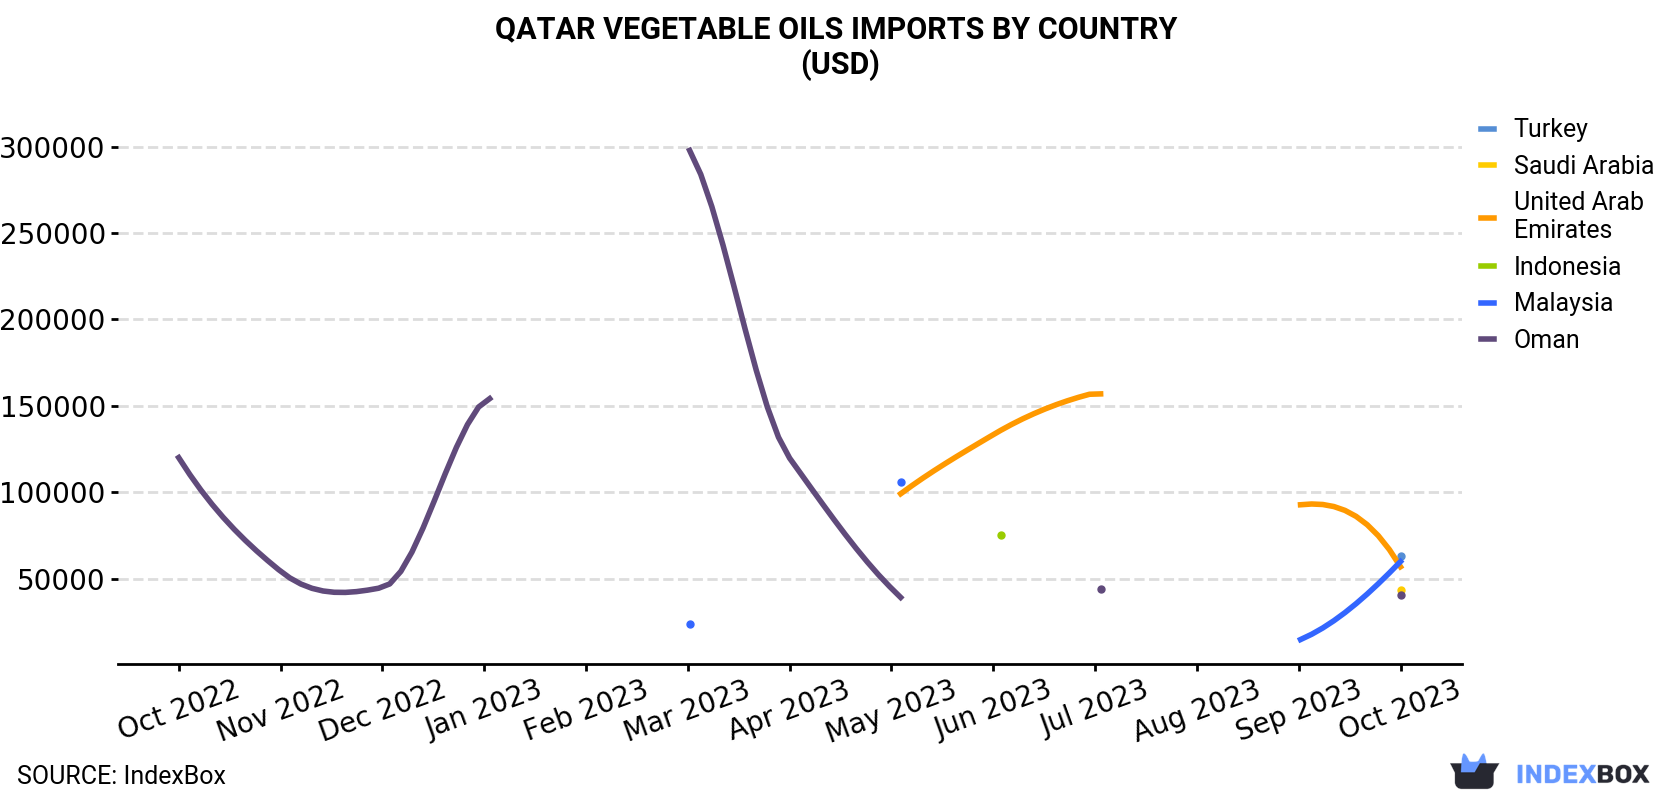 Qatar Vegetable Oils Imports By Country (USD)